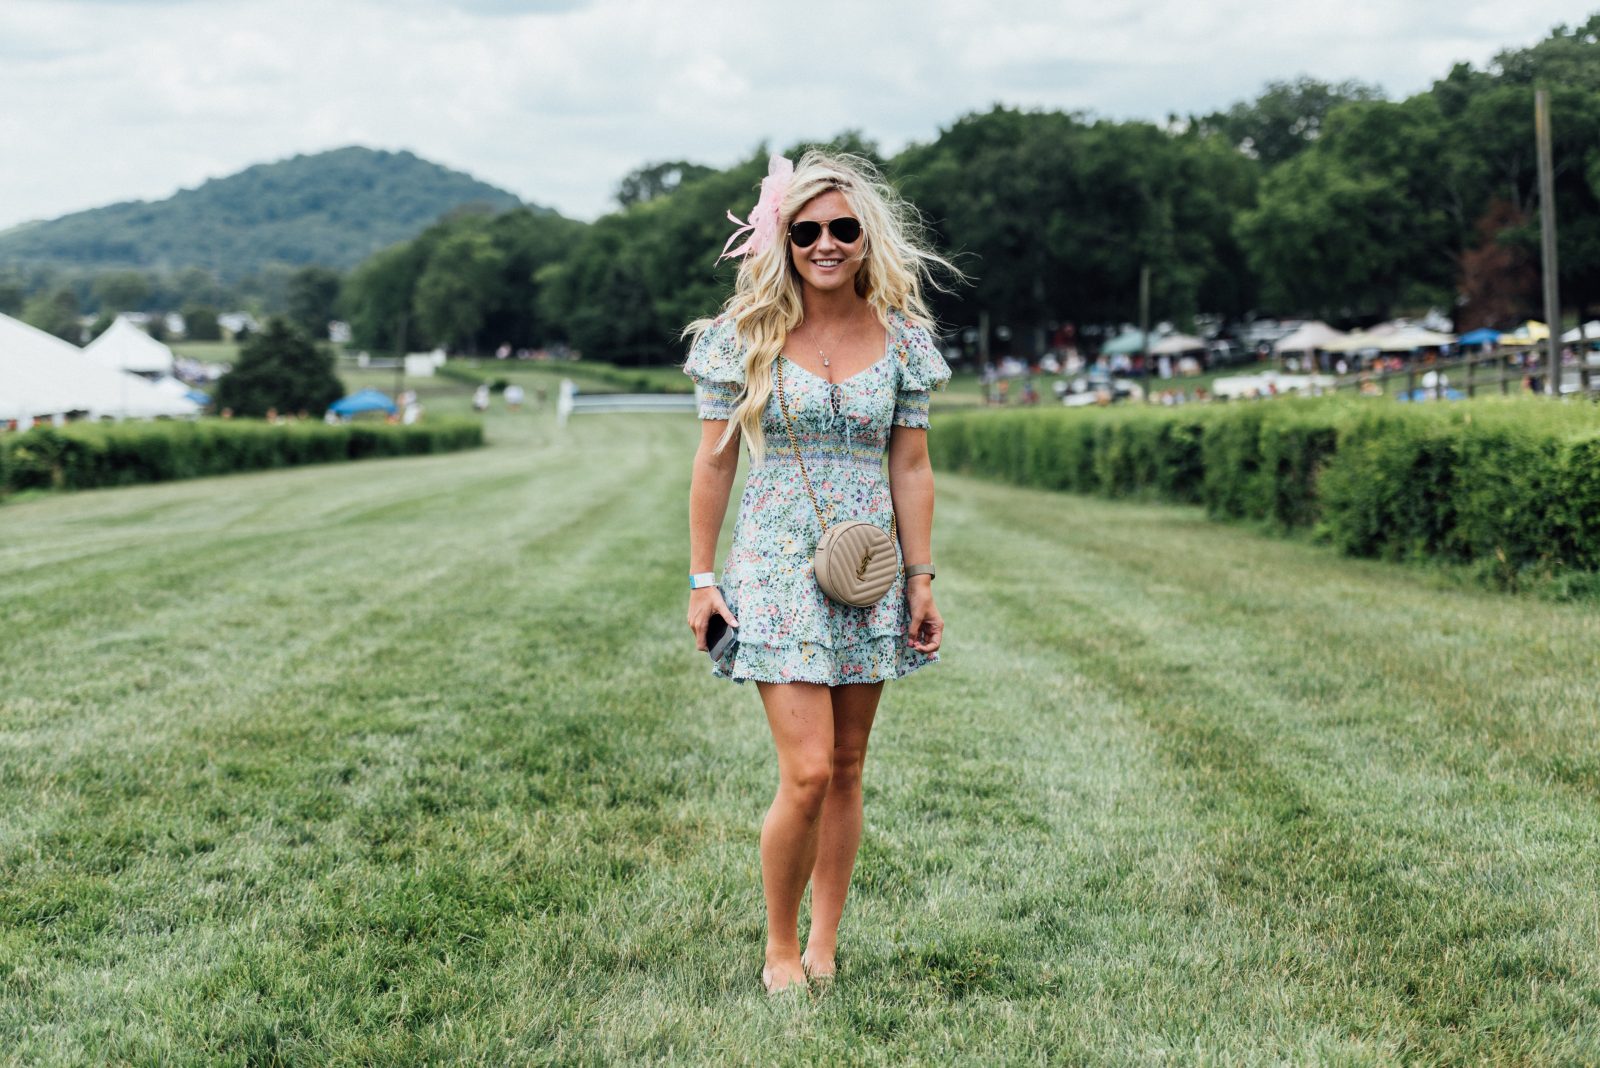 Erin Parker at the TN Steeplechase outdoor fashion show